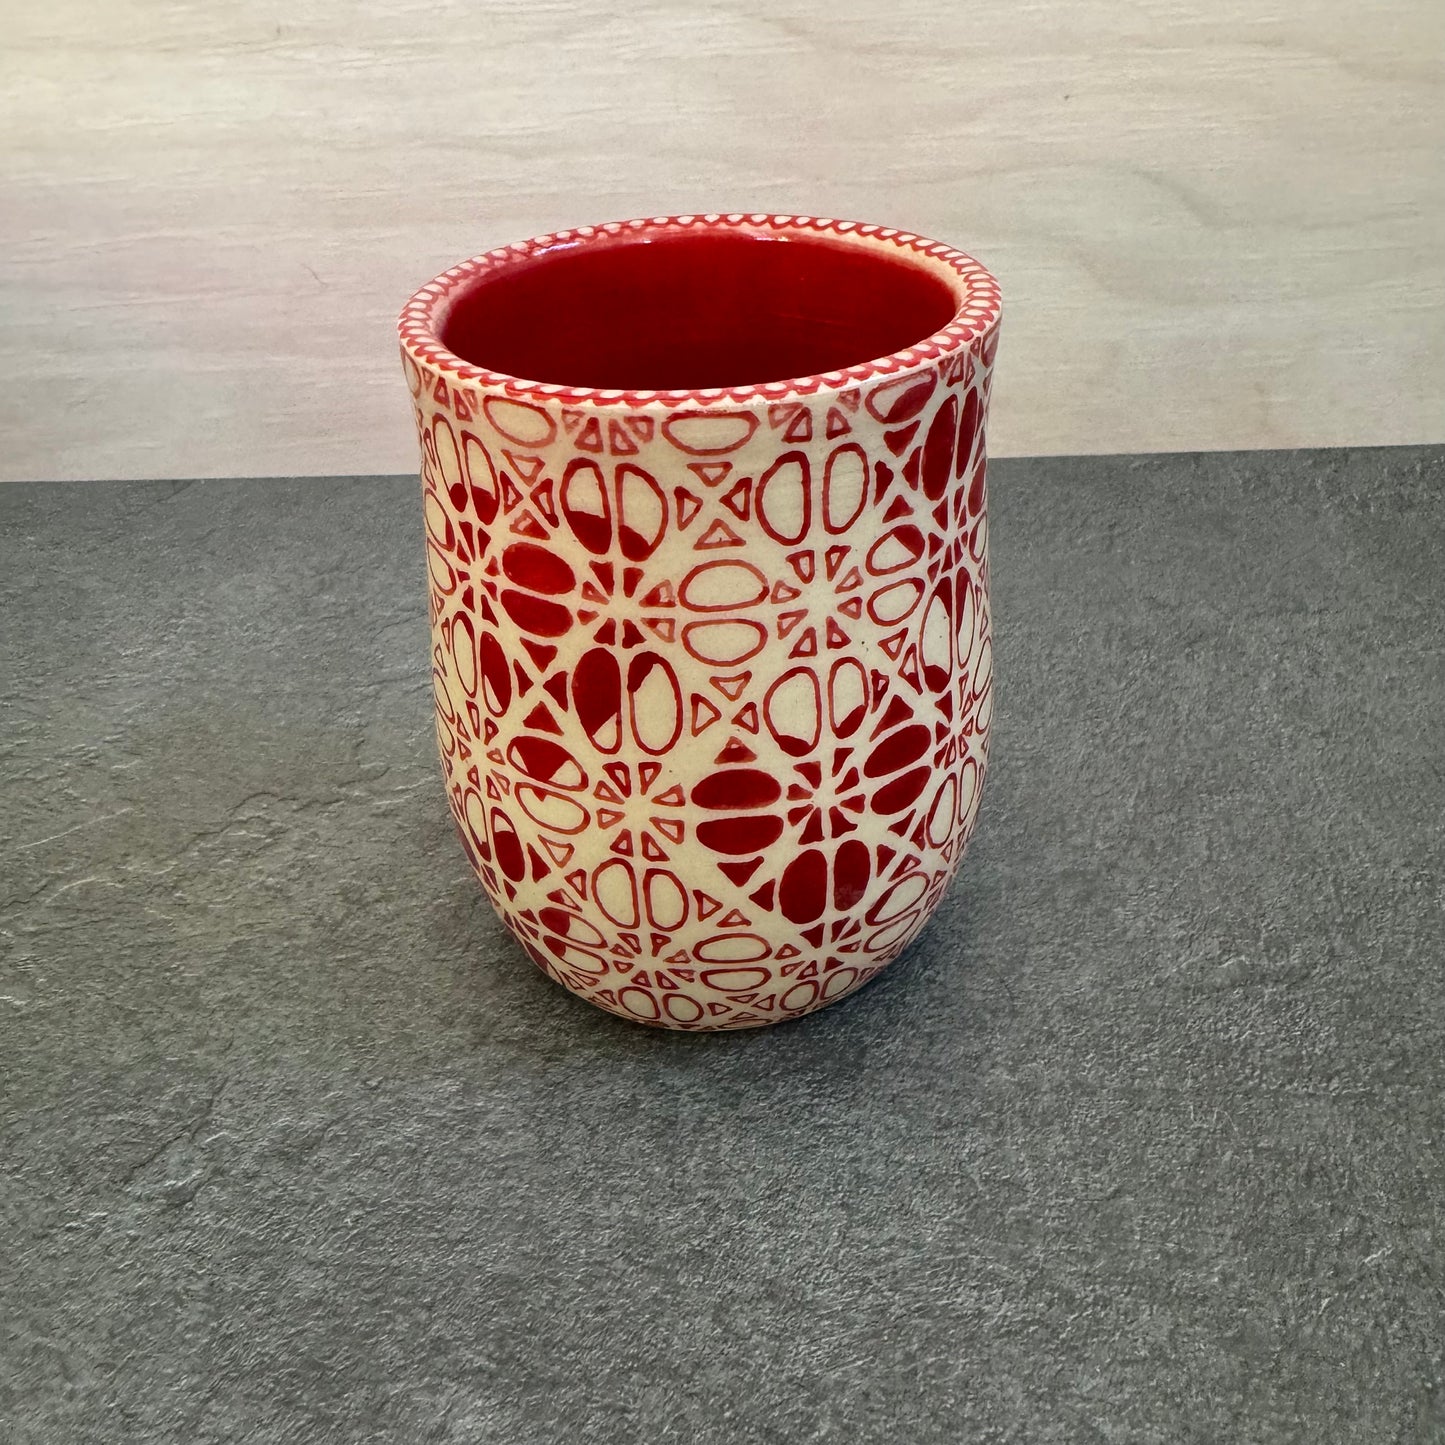 SECOND - Round Red Cup with Heart design